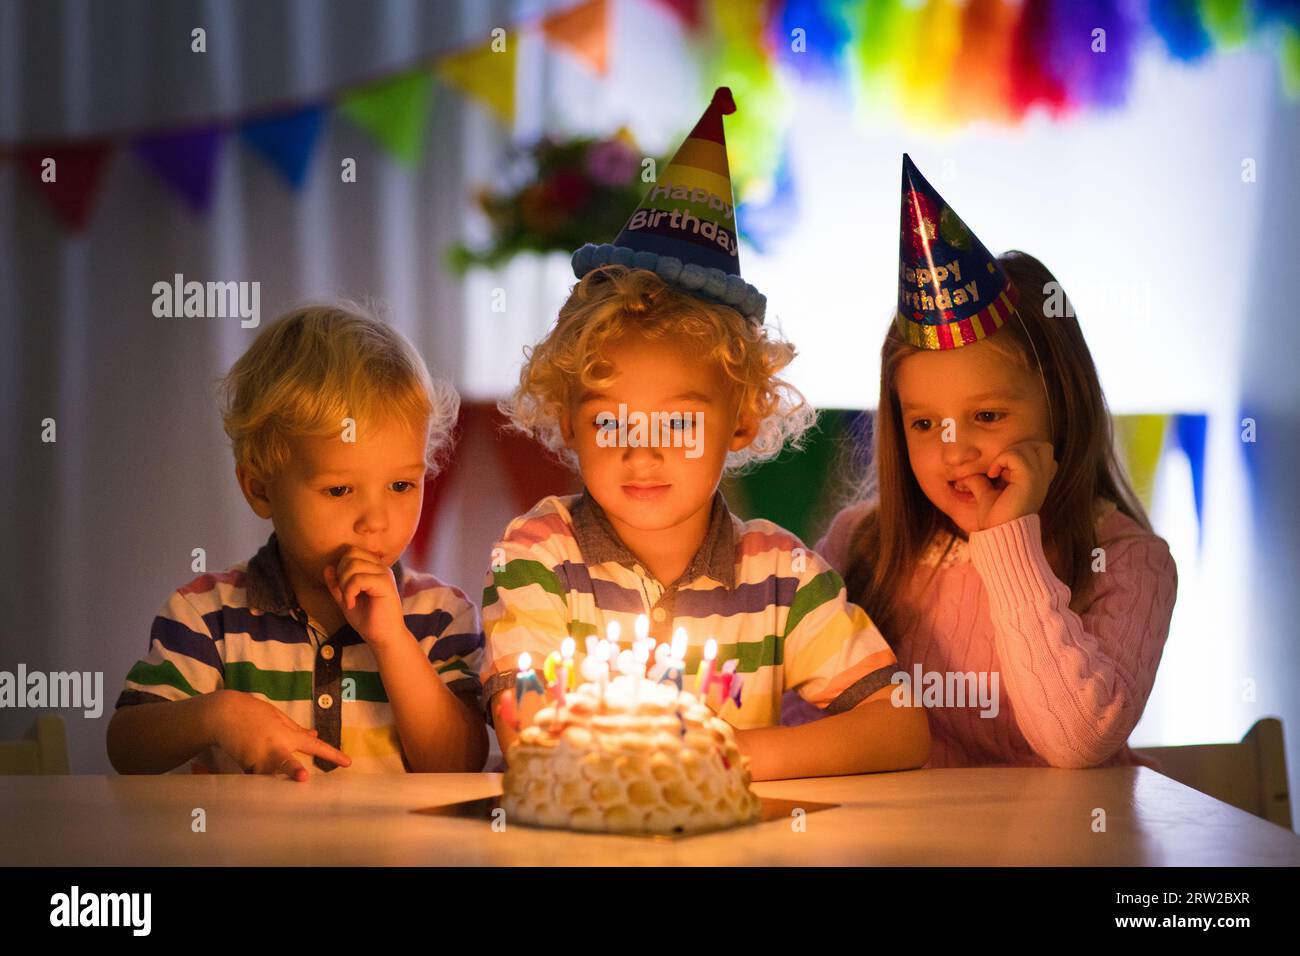 Kids birthday party. Children blow out candles on cake in dark room. Rainbow decoration and table setting for kids event, banner and flag. Stock Photo